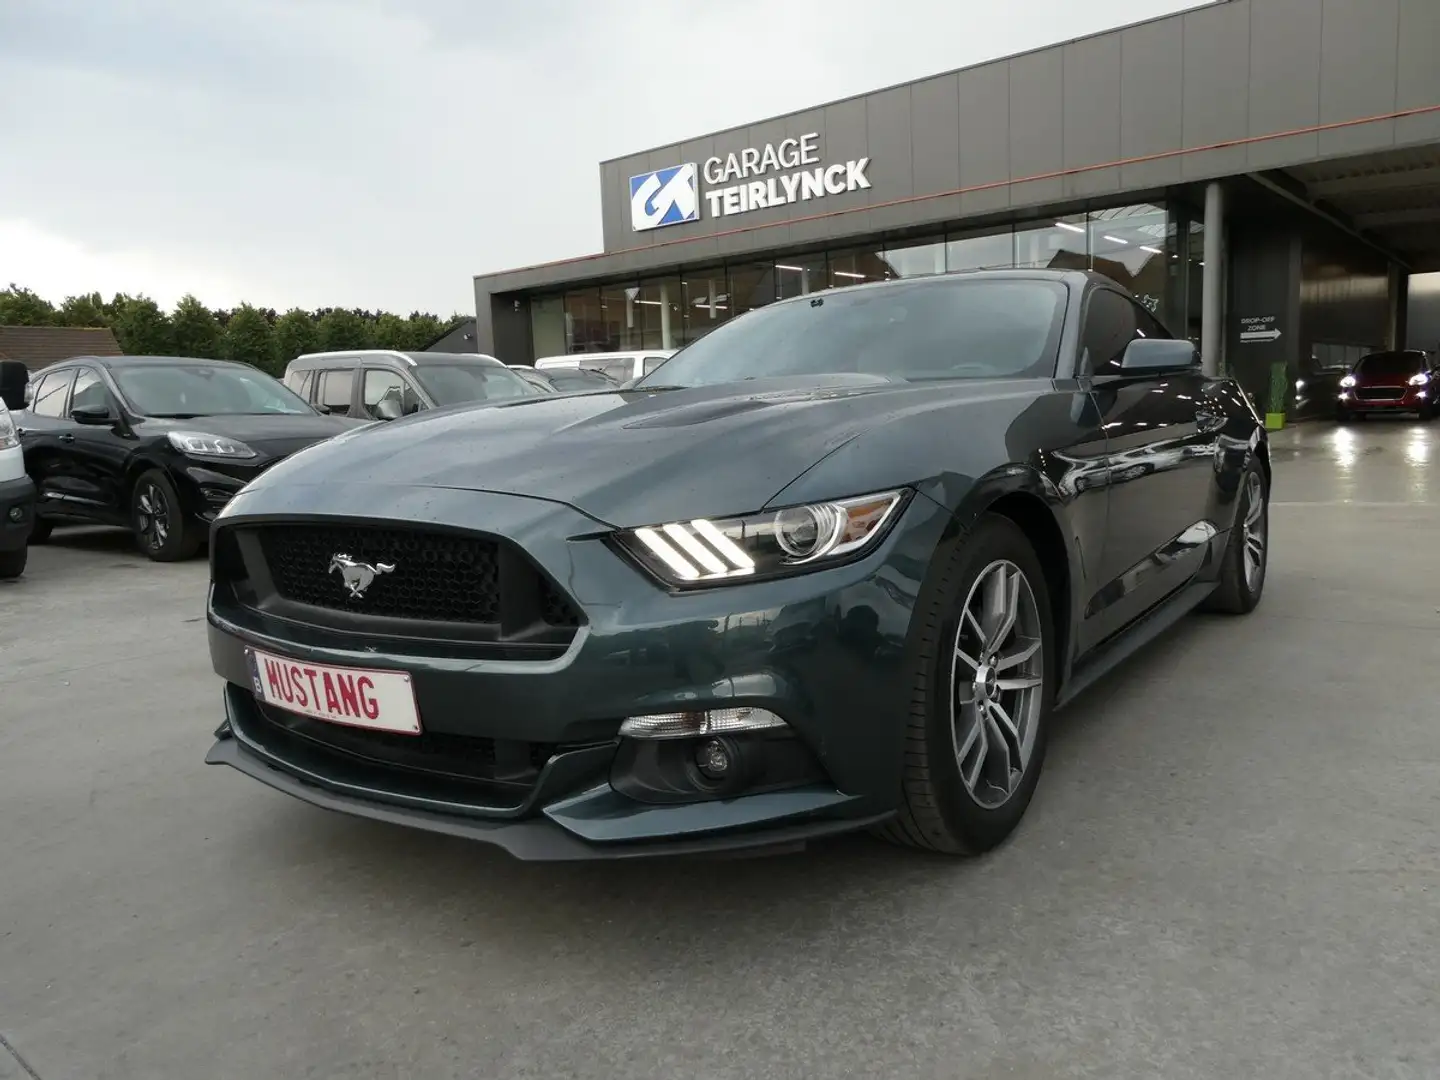 Ford Mustang Coupe Automaat 2.3 i 317pk '15 33000km (48593) Vert - 2